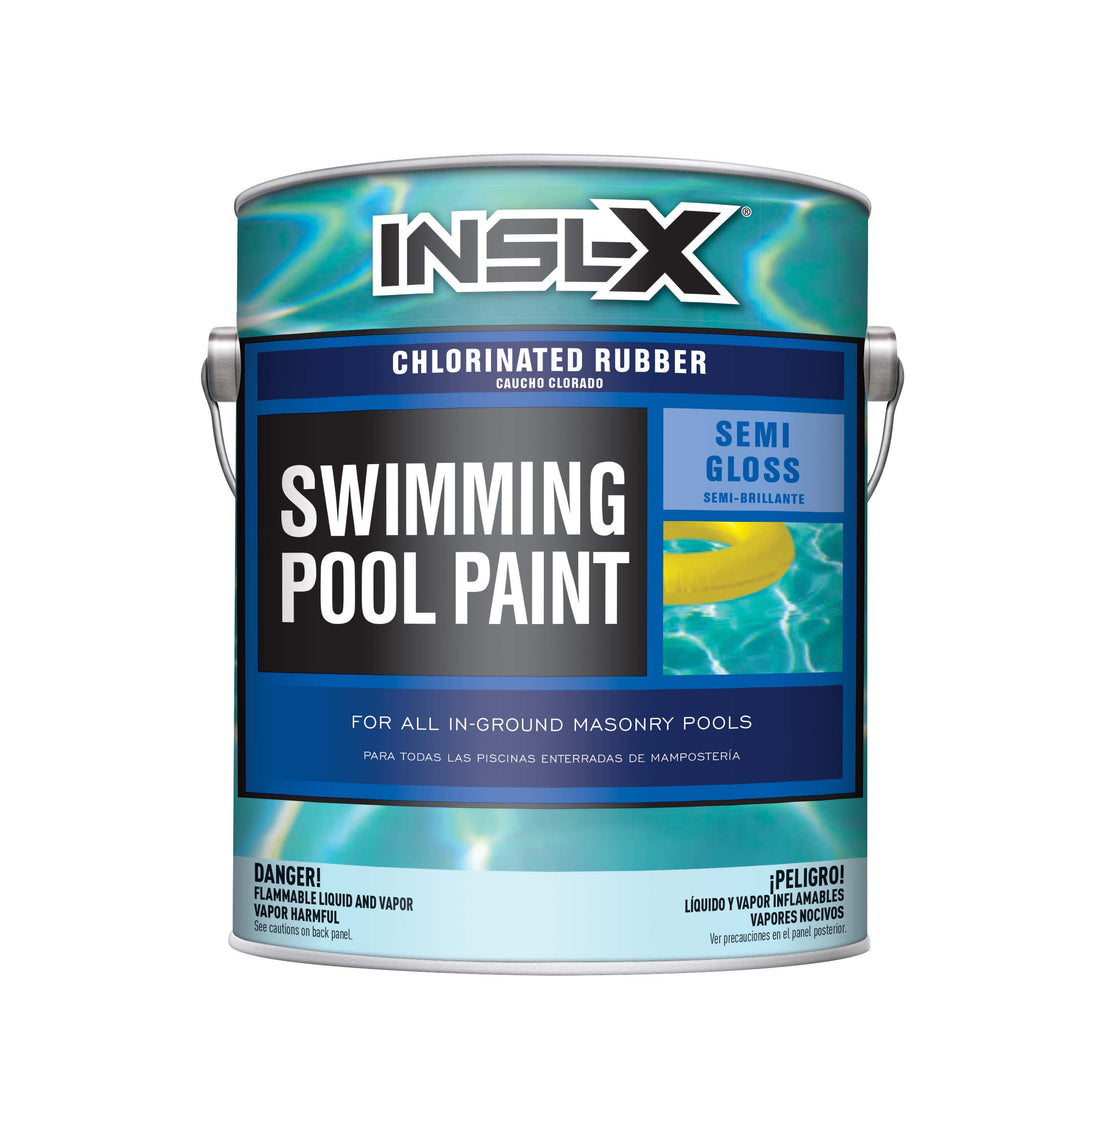 INSL-X CHLORINATED RUBBER POOL PAINT